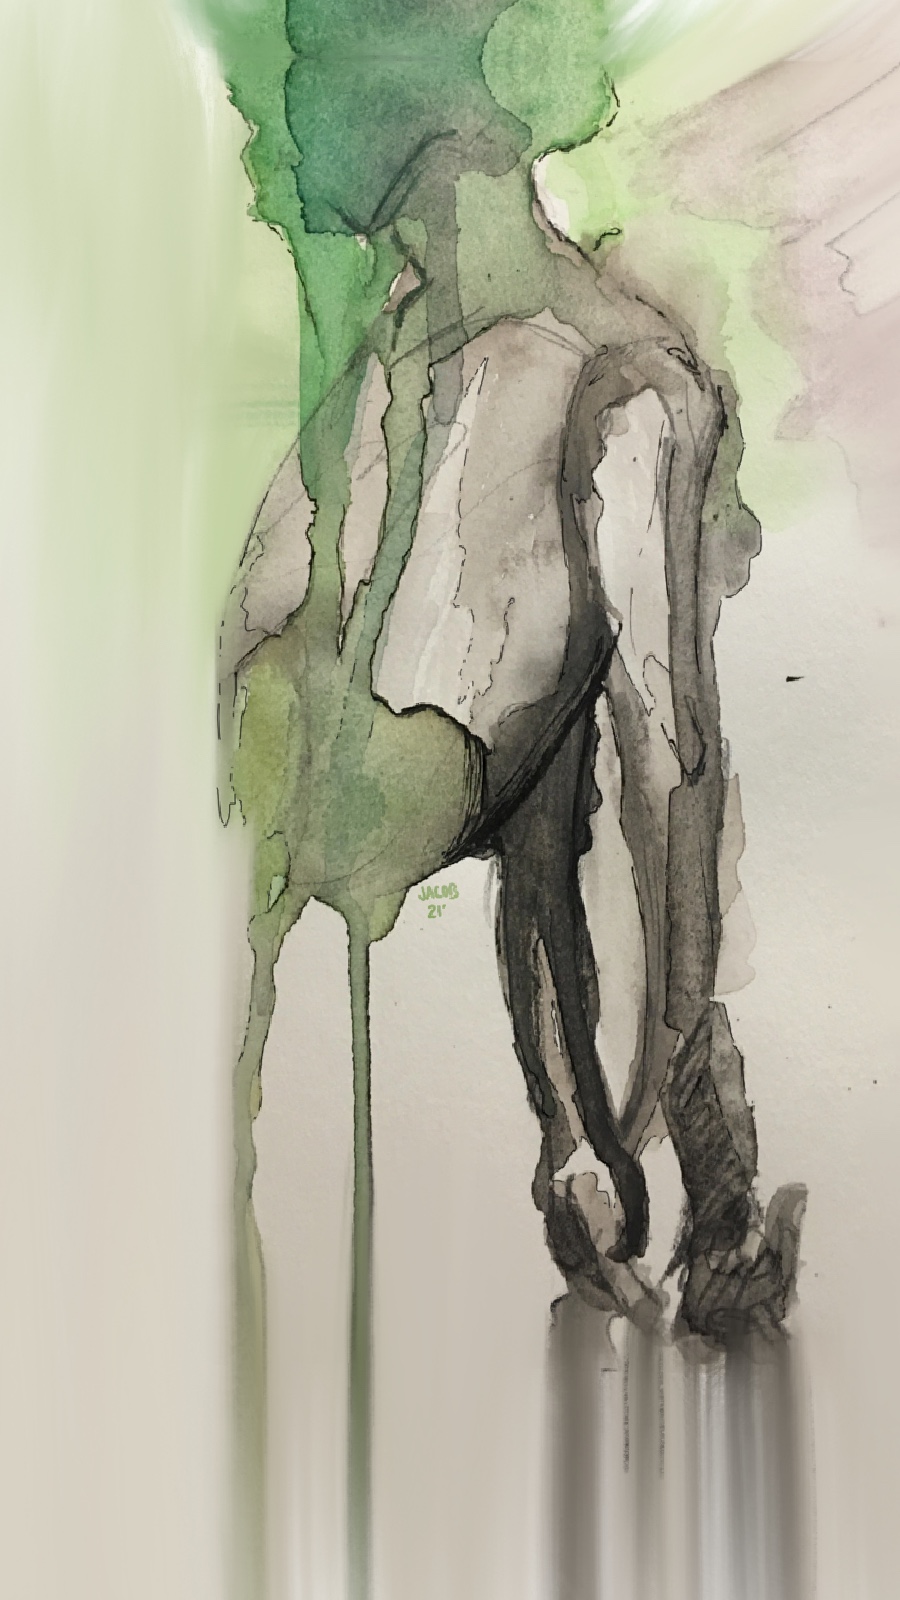 A human-like figure with a green-painted head and no legs hangs its arms behind its back